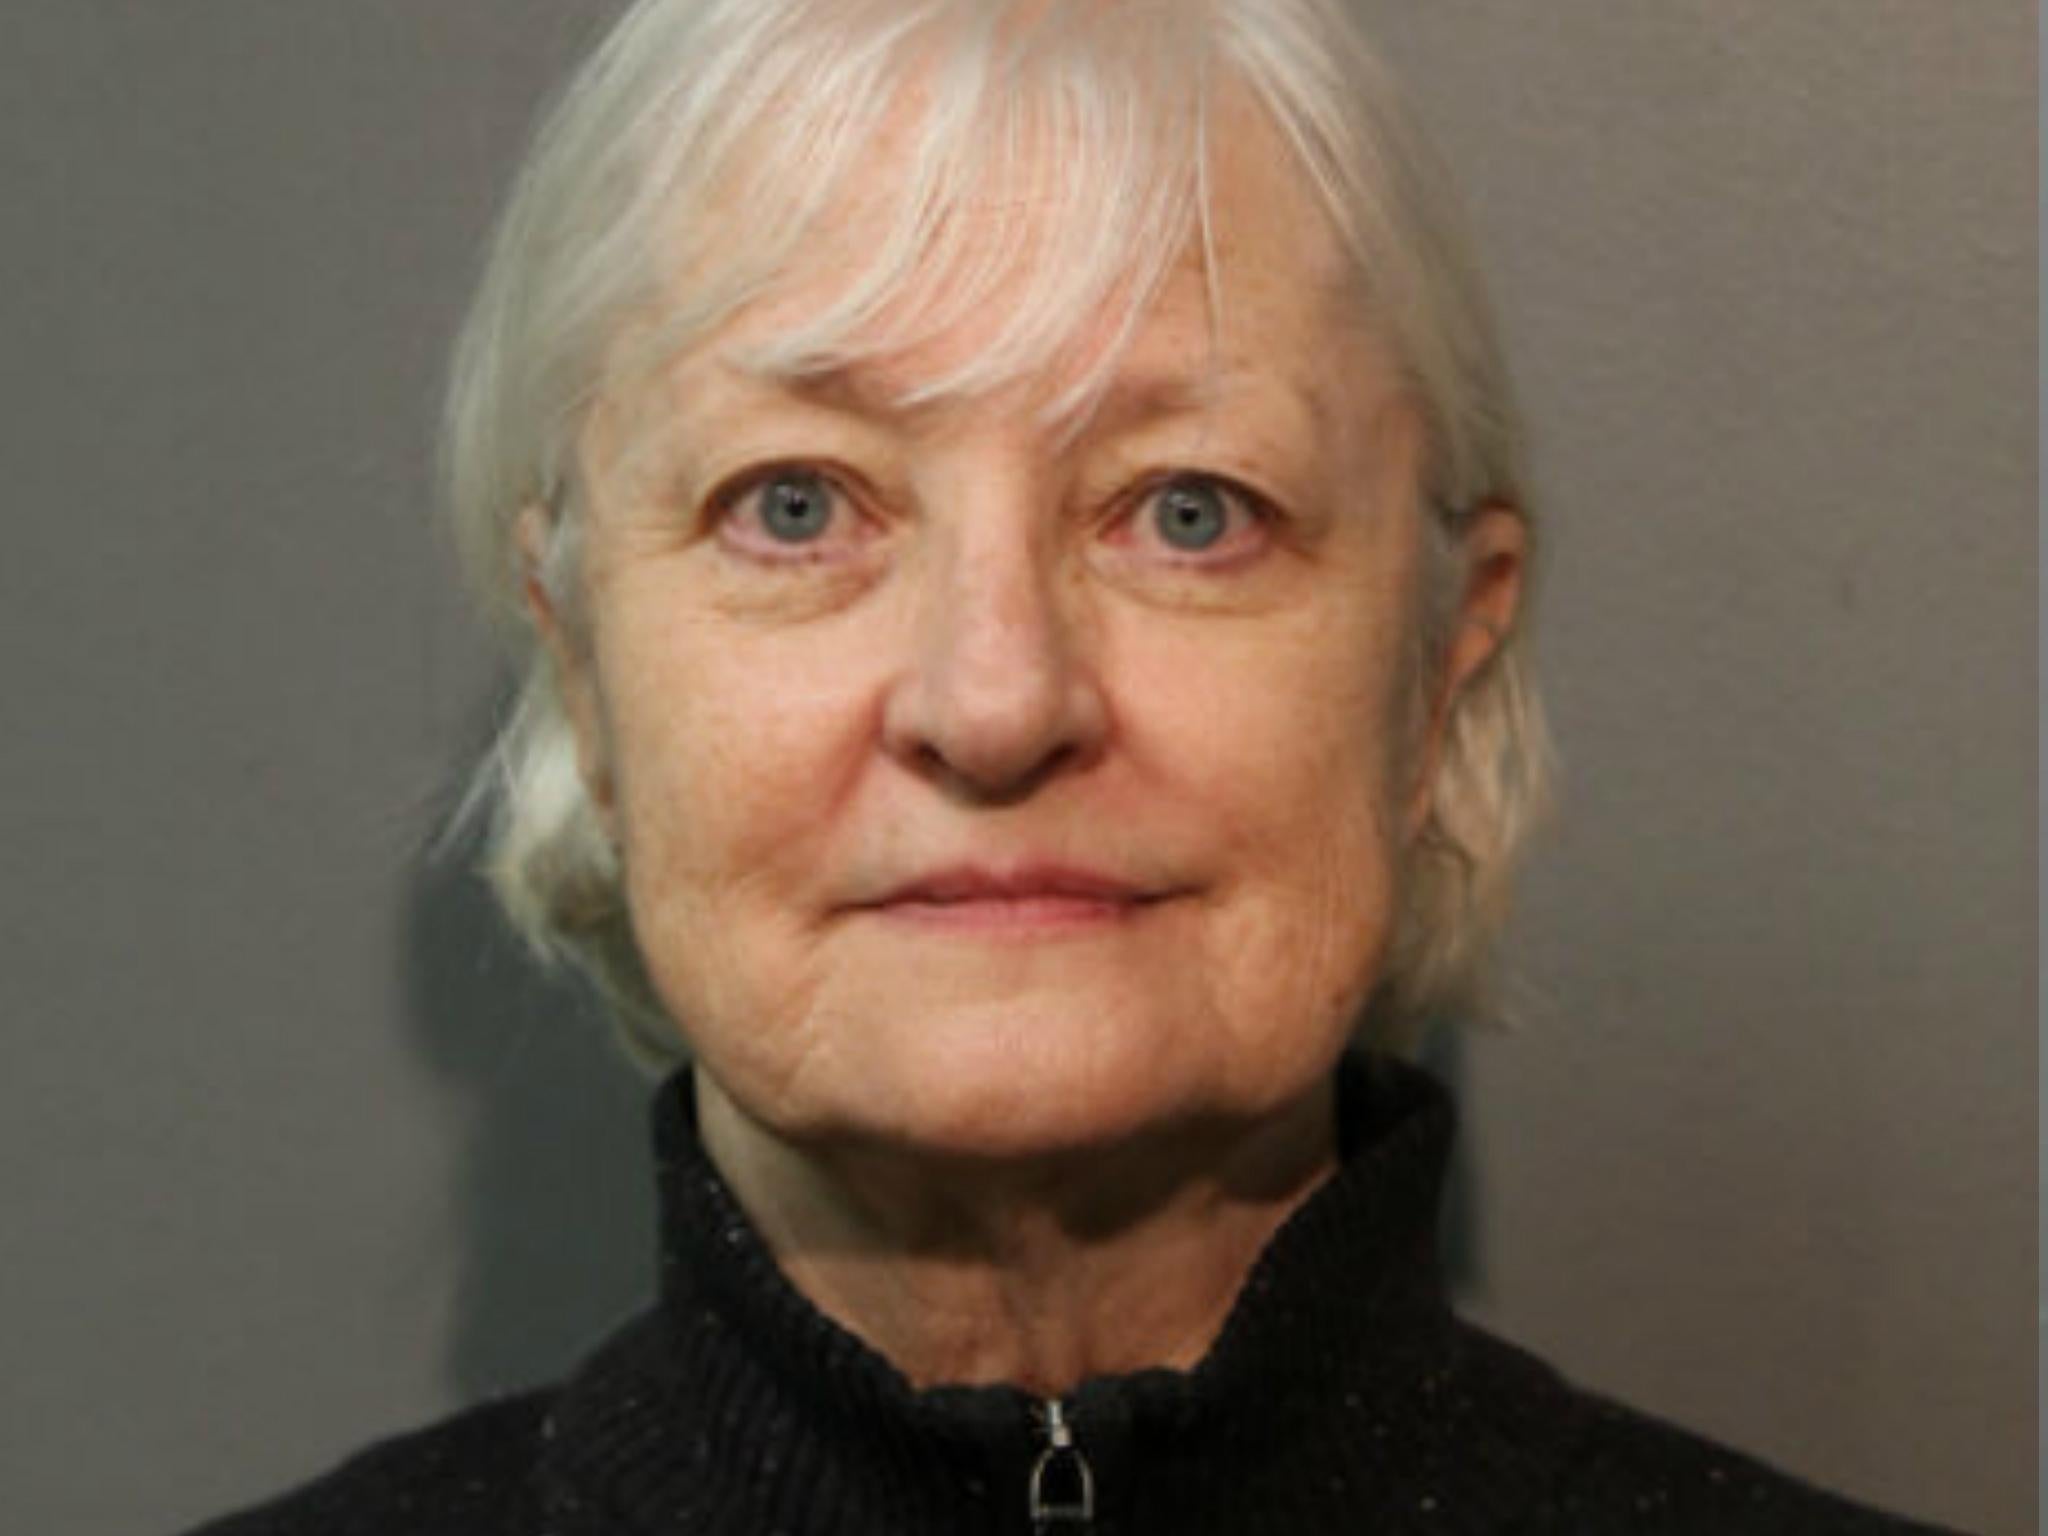 Marilyn Hartman poses in this January 2018 photo provided by the Chicago Police Department.